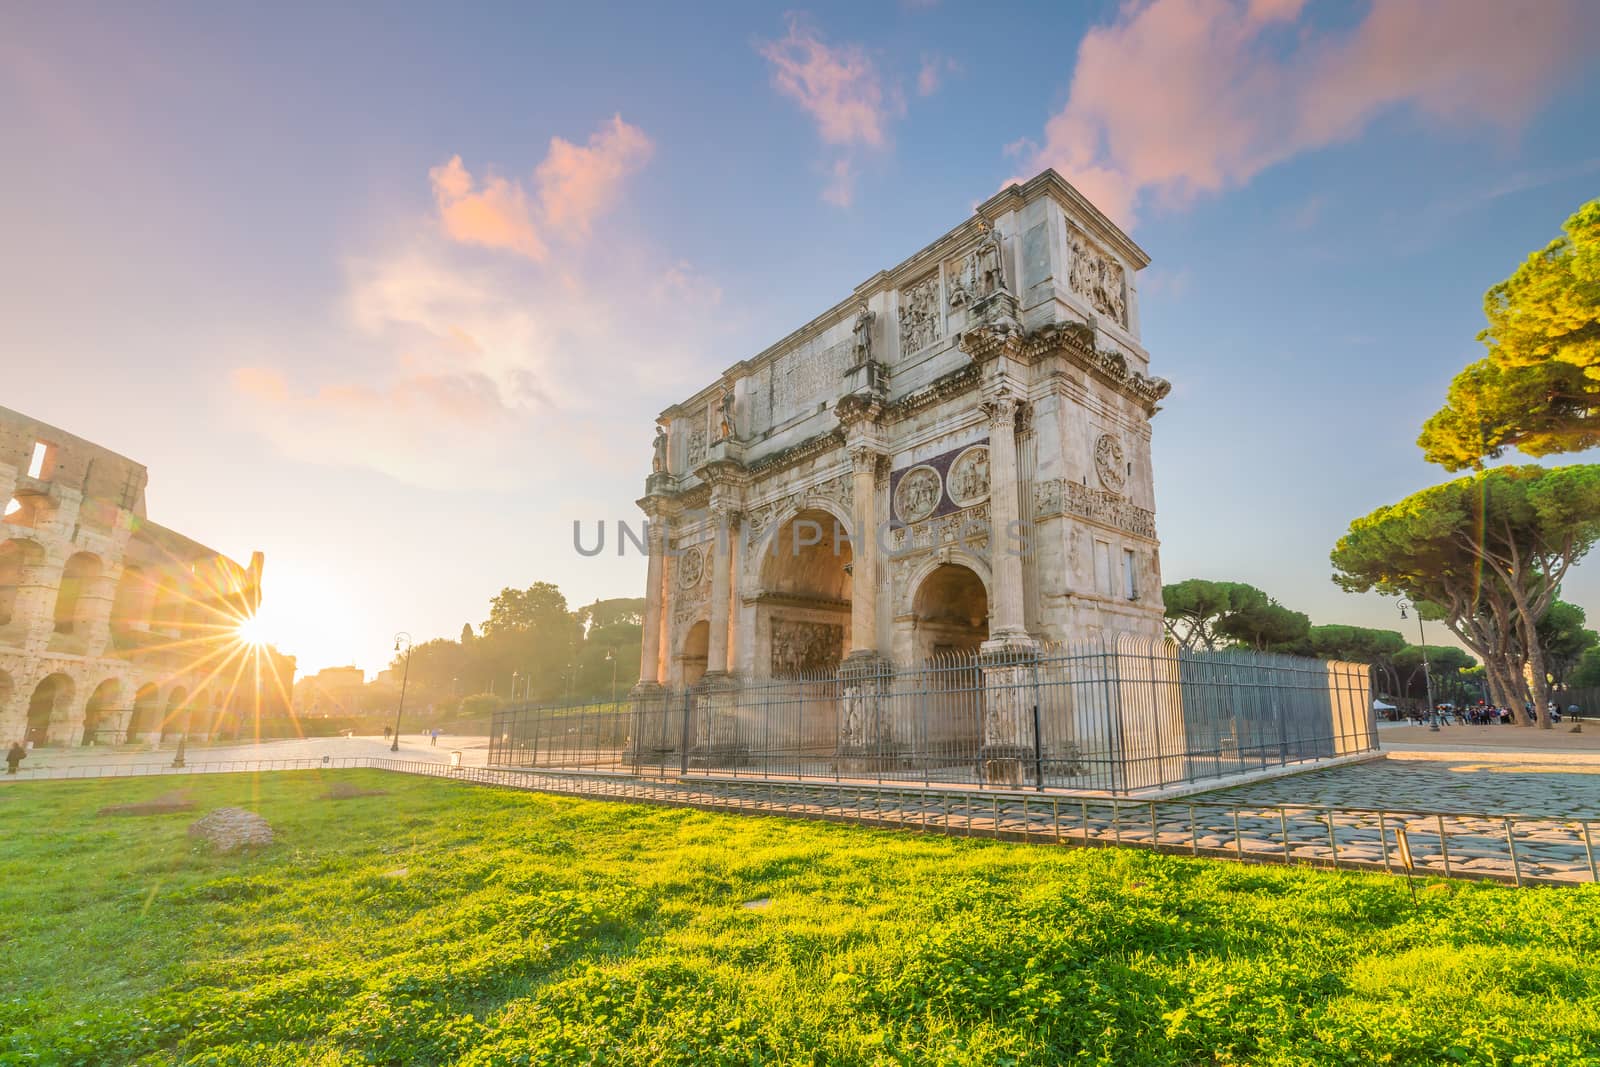 View of the Arch of Constantine in Rome, Italy by f11photo